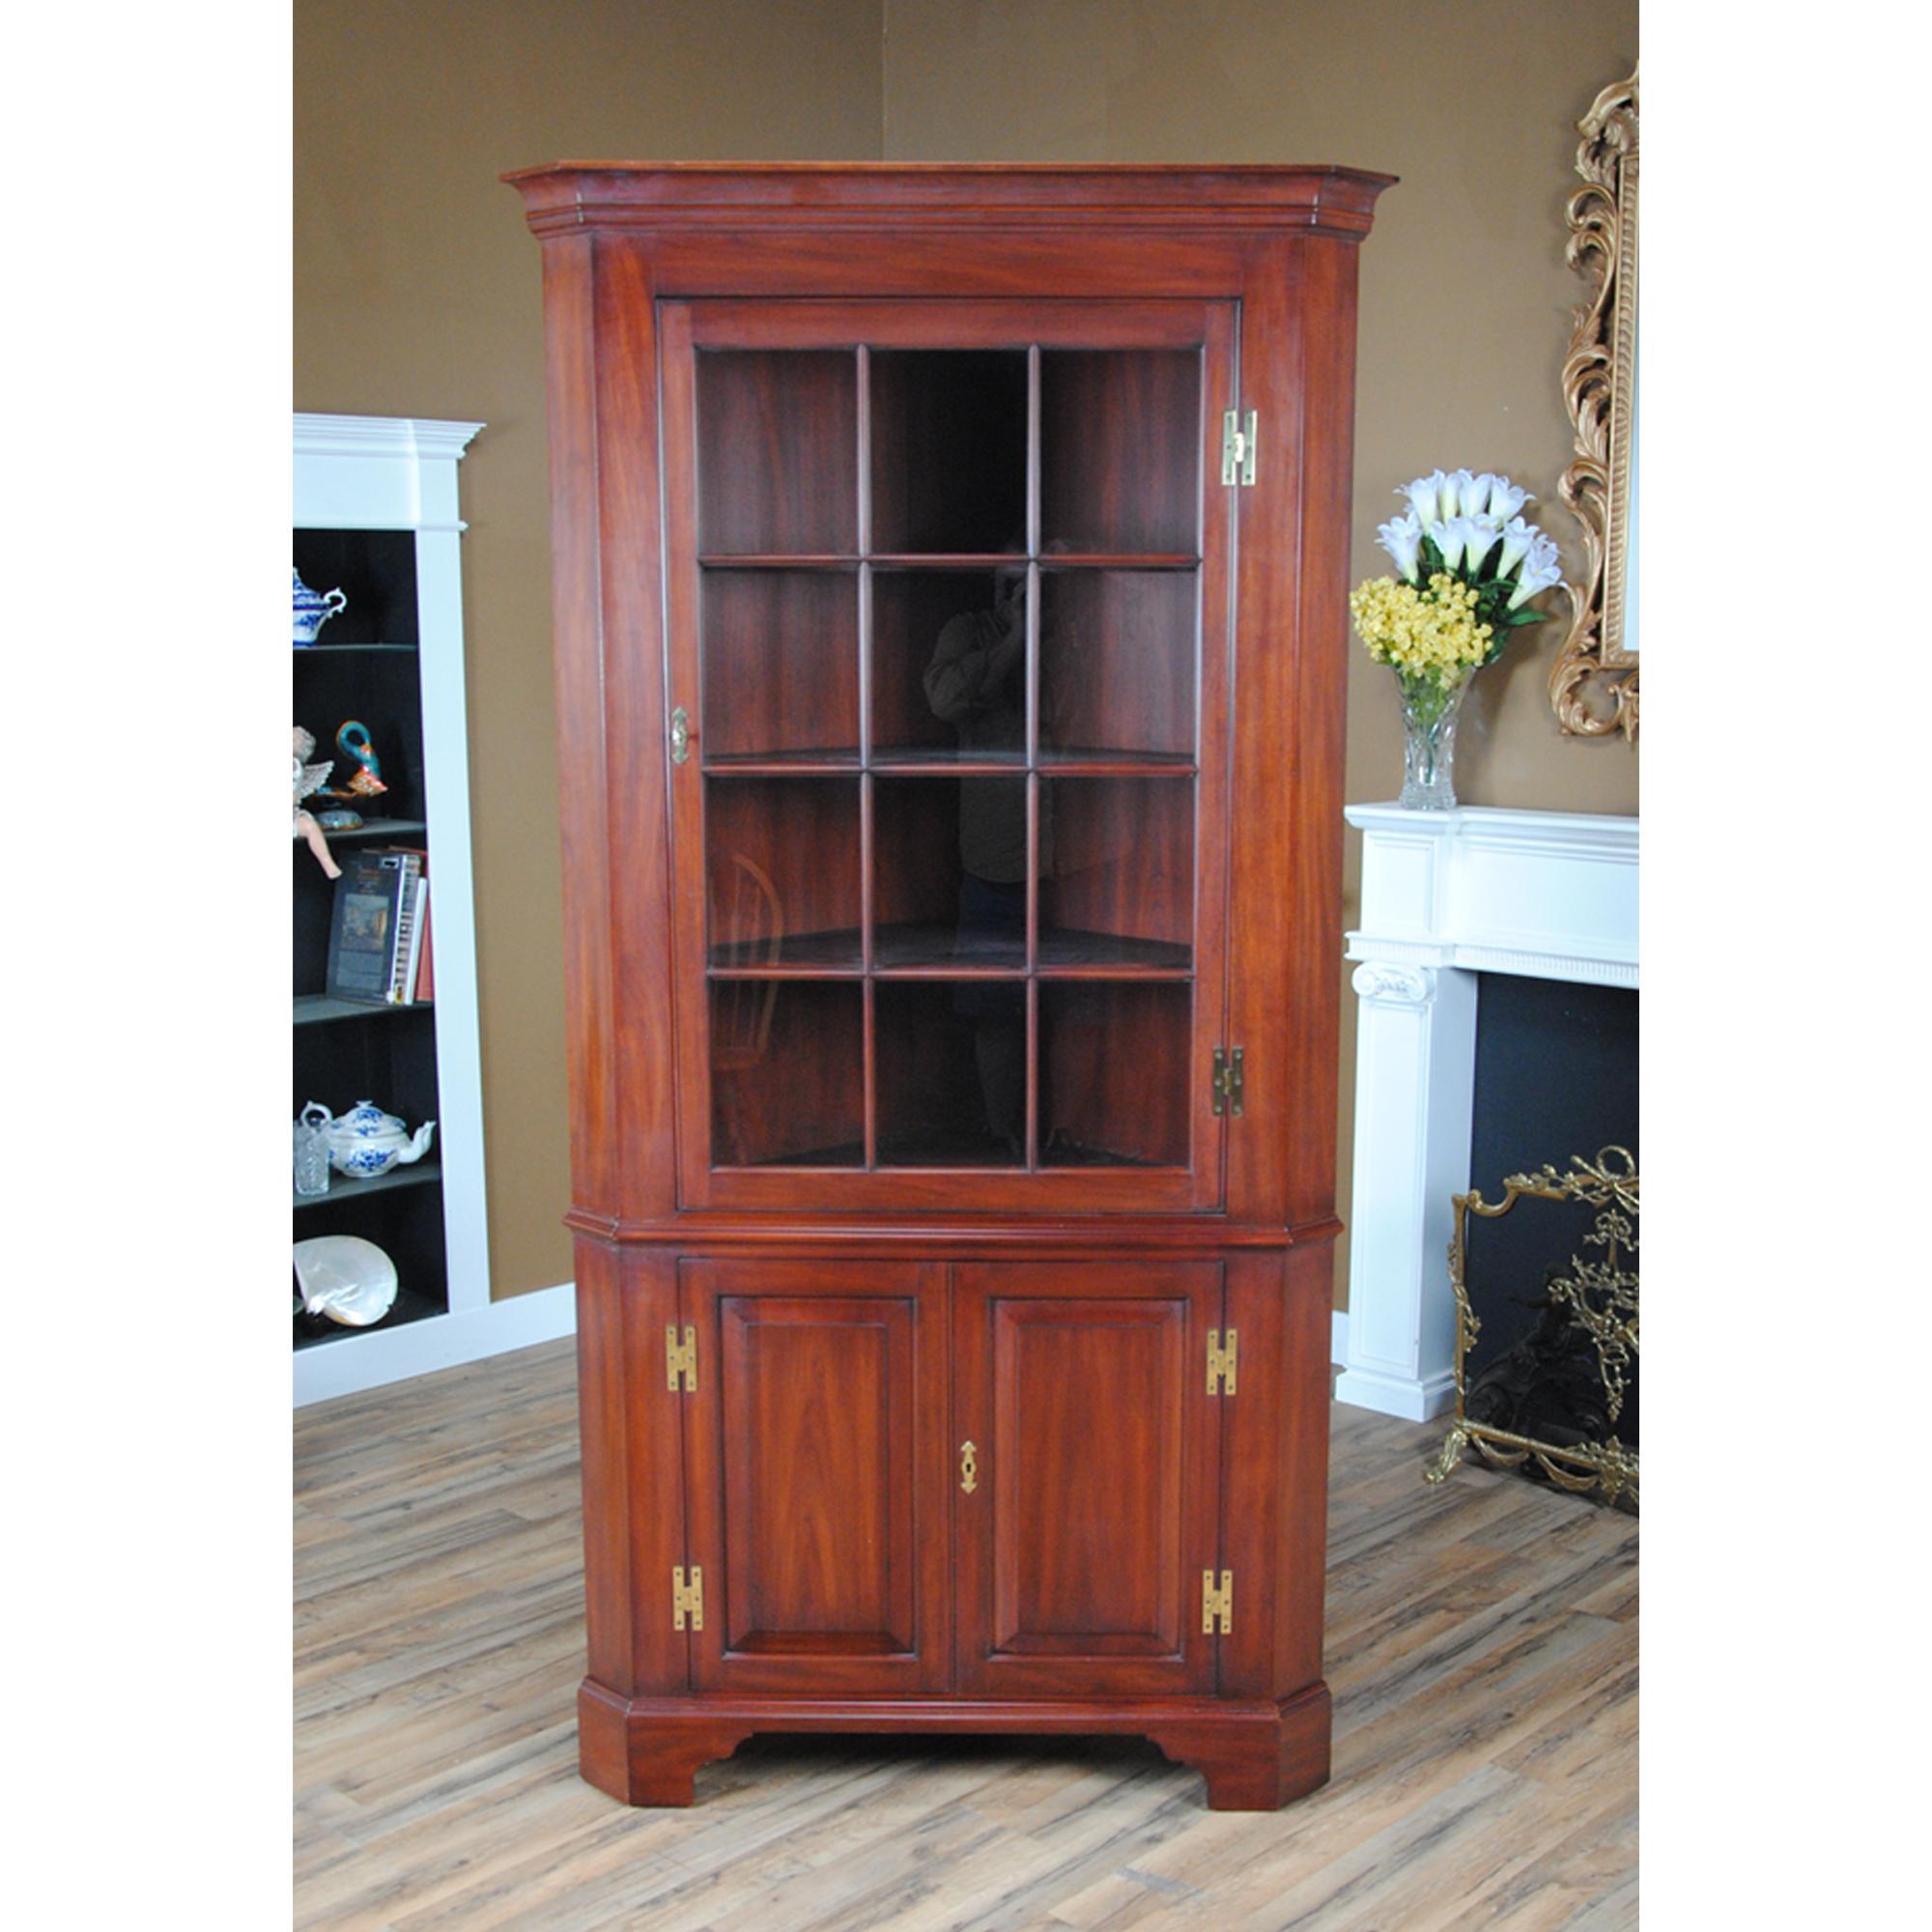 This Vintage Henkel Harris Corner Closet is manufactured using solid cherry on all exposed surfaces and a plywood back. The attention to detail and expert craftsmanship is apparent throughout this china closet in details such as the still